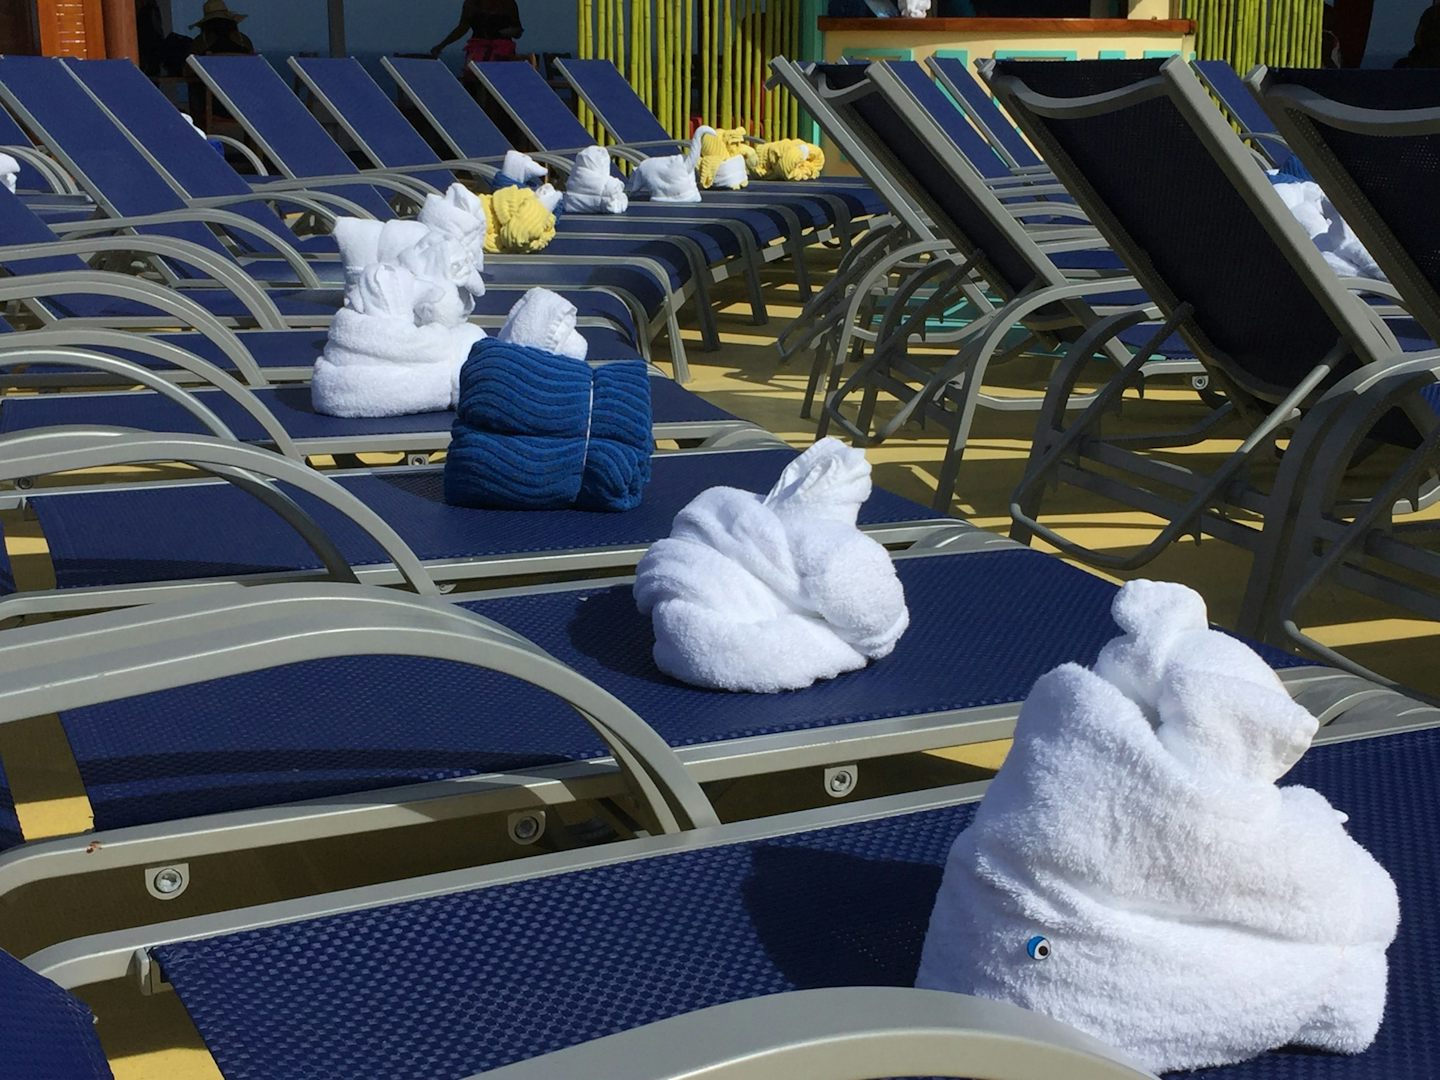 Towel animals galore magically appear overnight to greet you on the Lido deck.